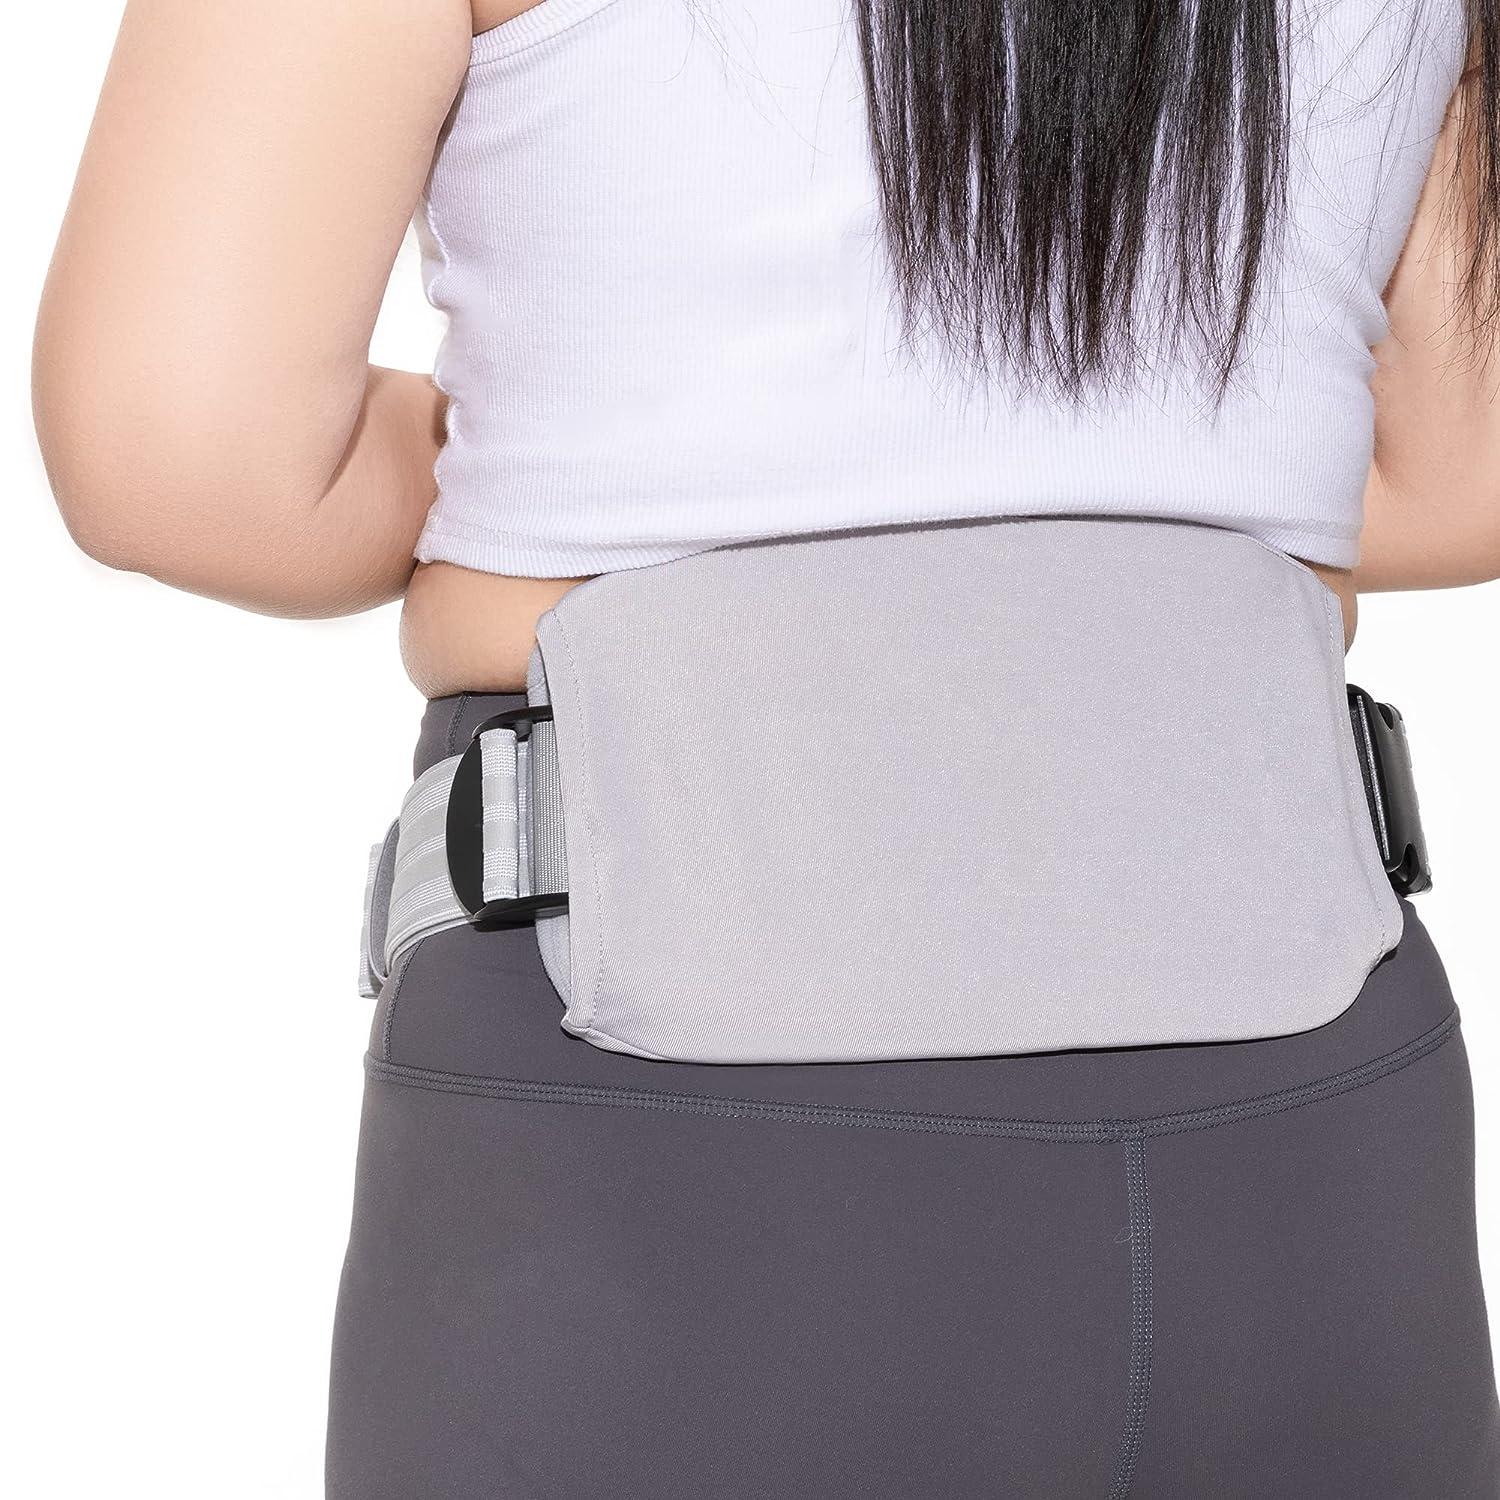 BORT Abdominal Belt, Thoracic, Tummy Support, 1 C-Section, Hysterectomy  Surgery Recovery Belt, Essential - BSOS Orthopedic Supply